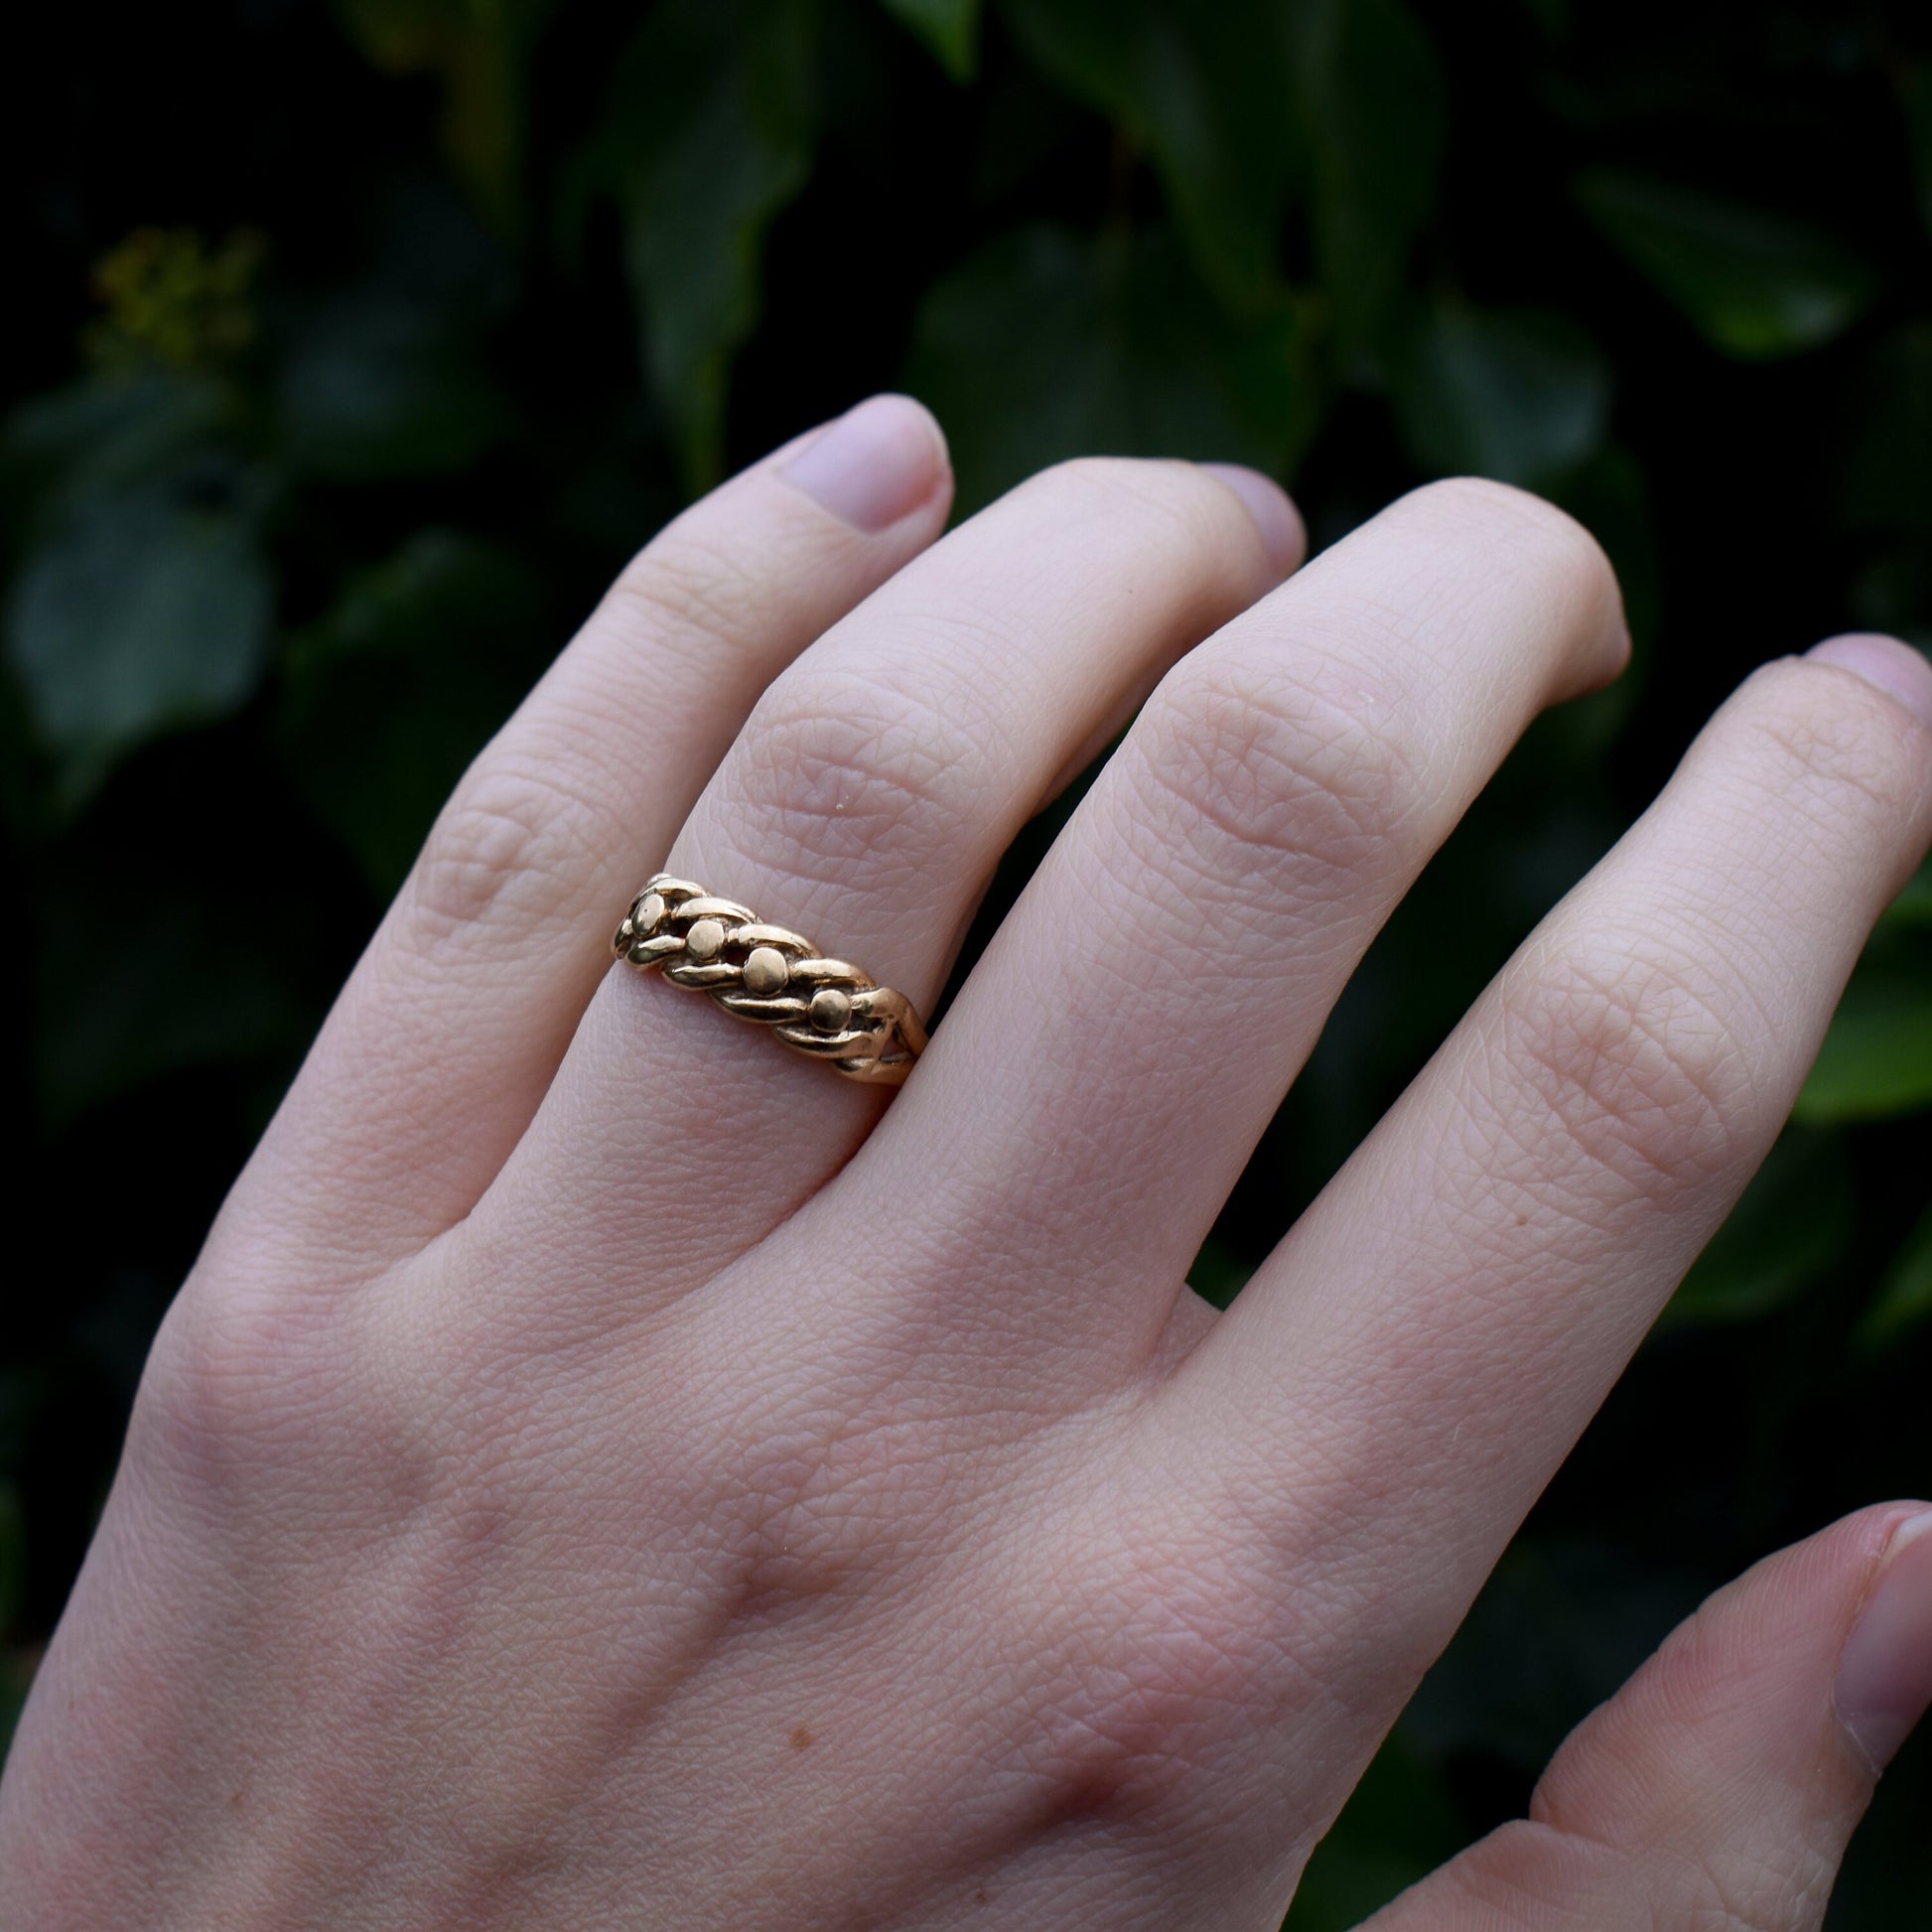 Vintage Knot Plait Braided Gold Keeper Ring Band